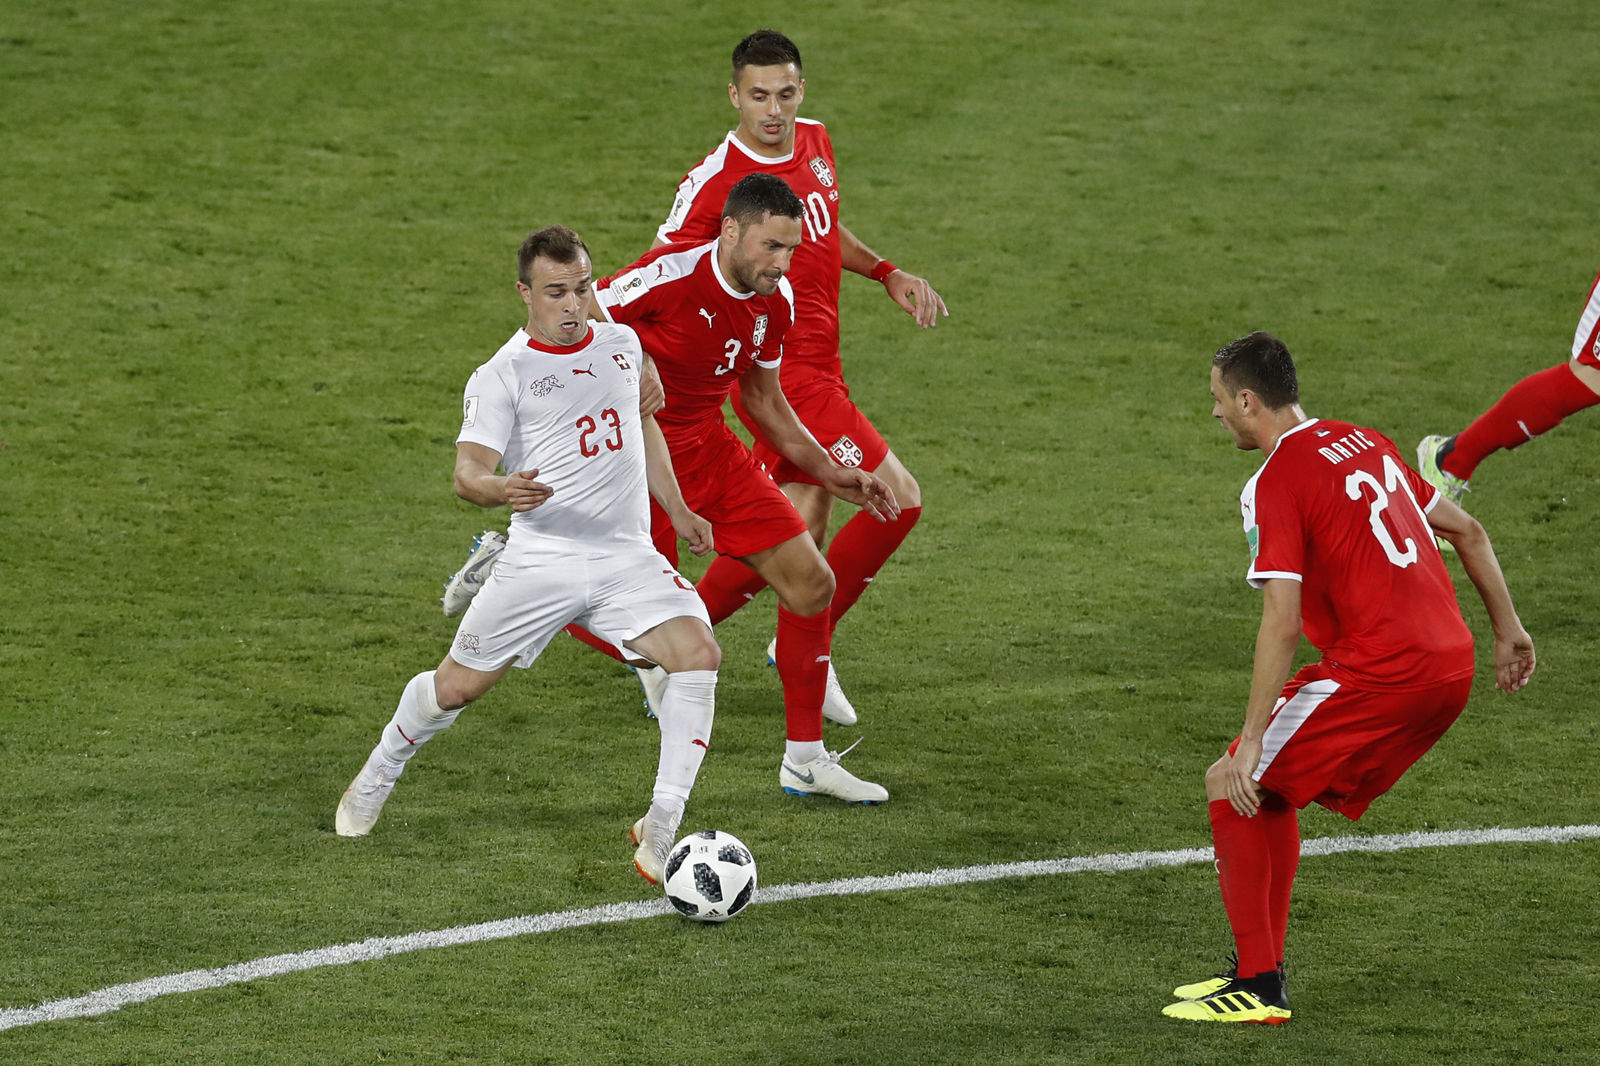 Switzerland's Xherdan Shaqiri, left, vies for the ball with Serbian defenders during the group E match between Switzerland and Serbia at the 2018 soccer World Cup in the Kaliningrad Stadium in Kaliningrad, Russia, Friday, June 22, 2018. (AP Photo/Antonio Calanni)